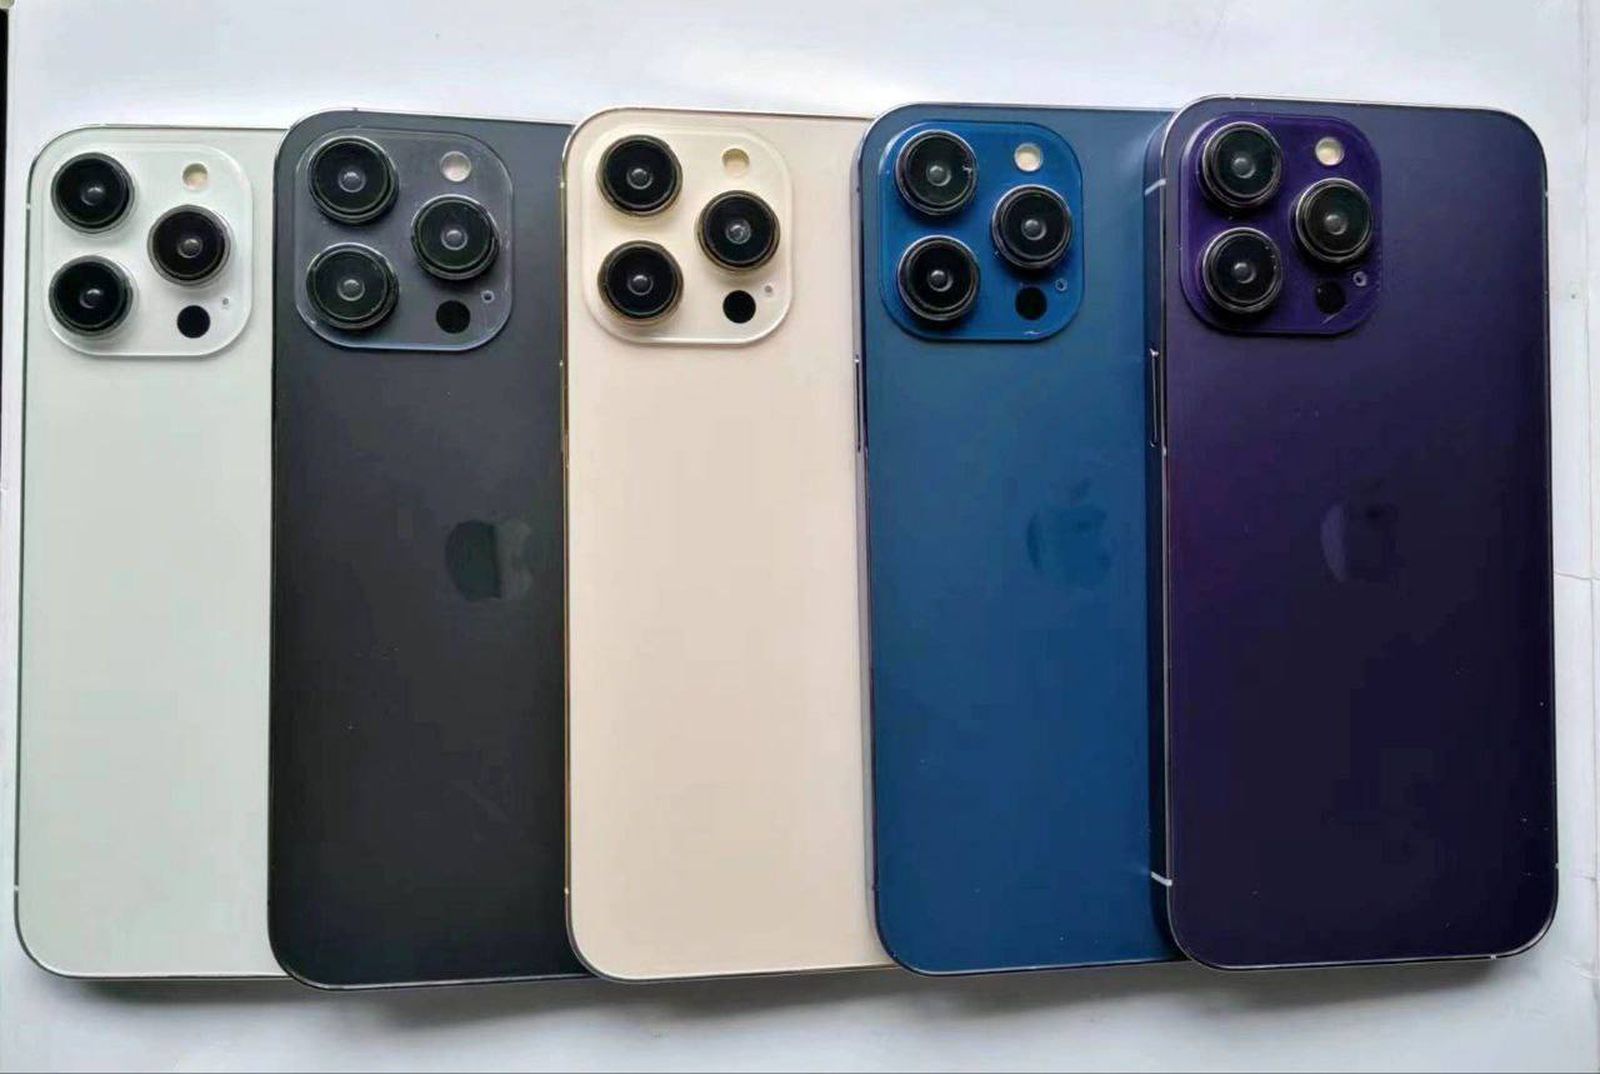 iphone-14-pro-colors